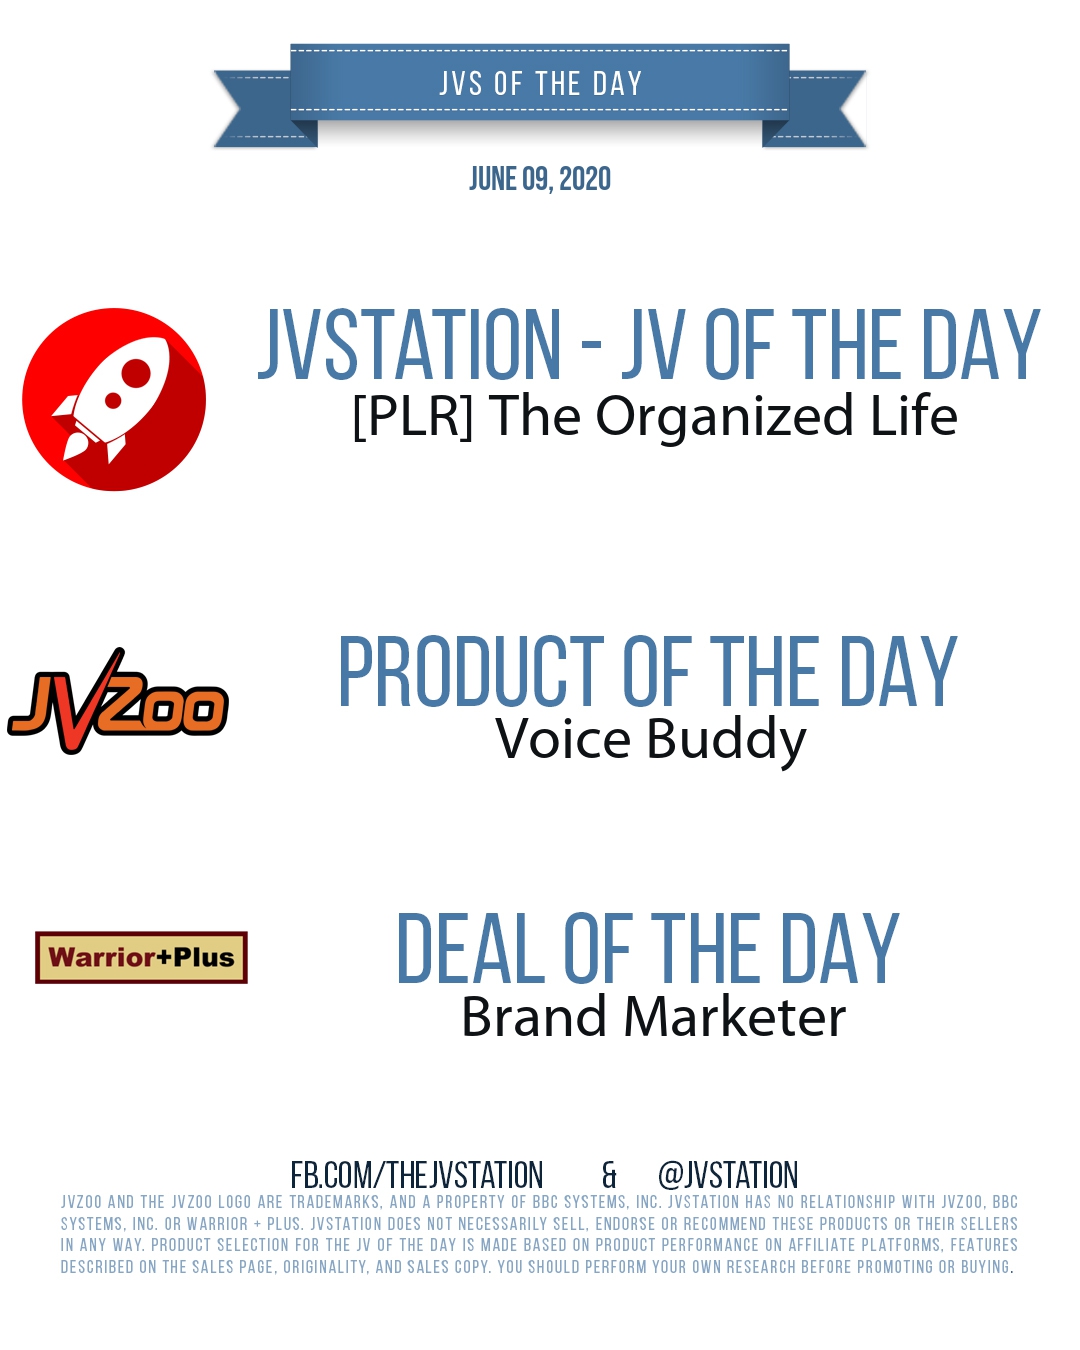 JVs of the day - June 09, 2020